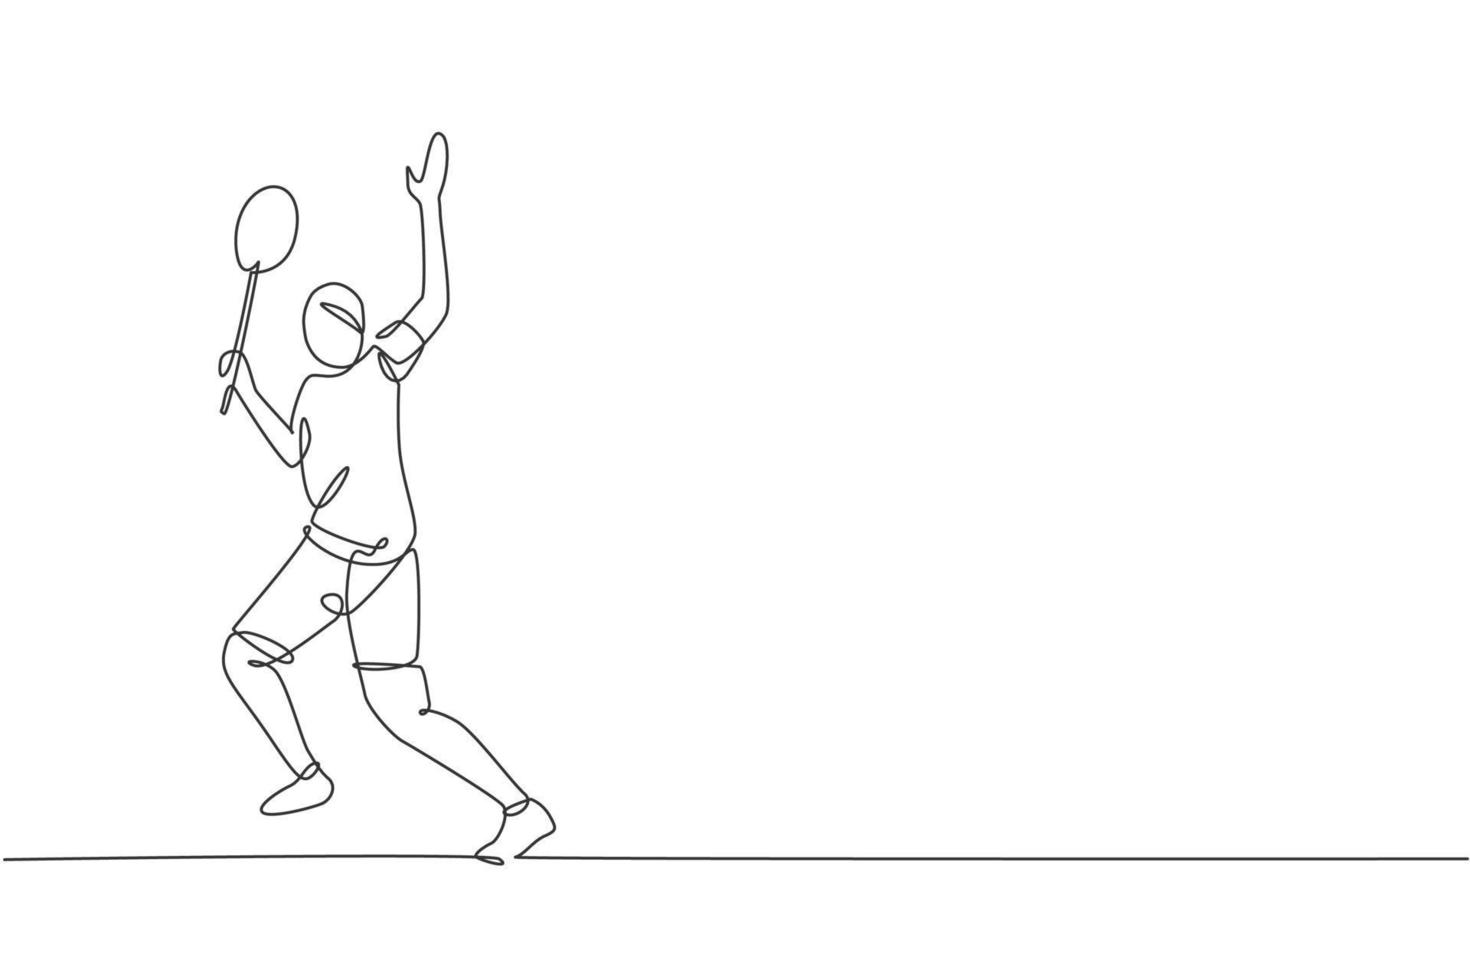 Single continuous line drawing of young agile badminton player hit shuttlecock. Competitive sport concept. Trendy one line draw design vector illustration for badminton tournament publication media